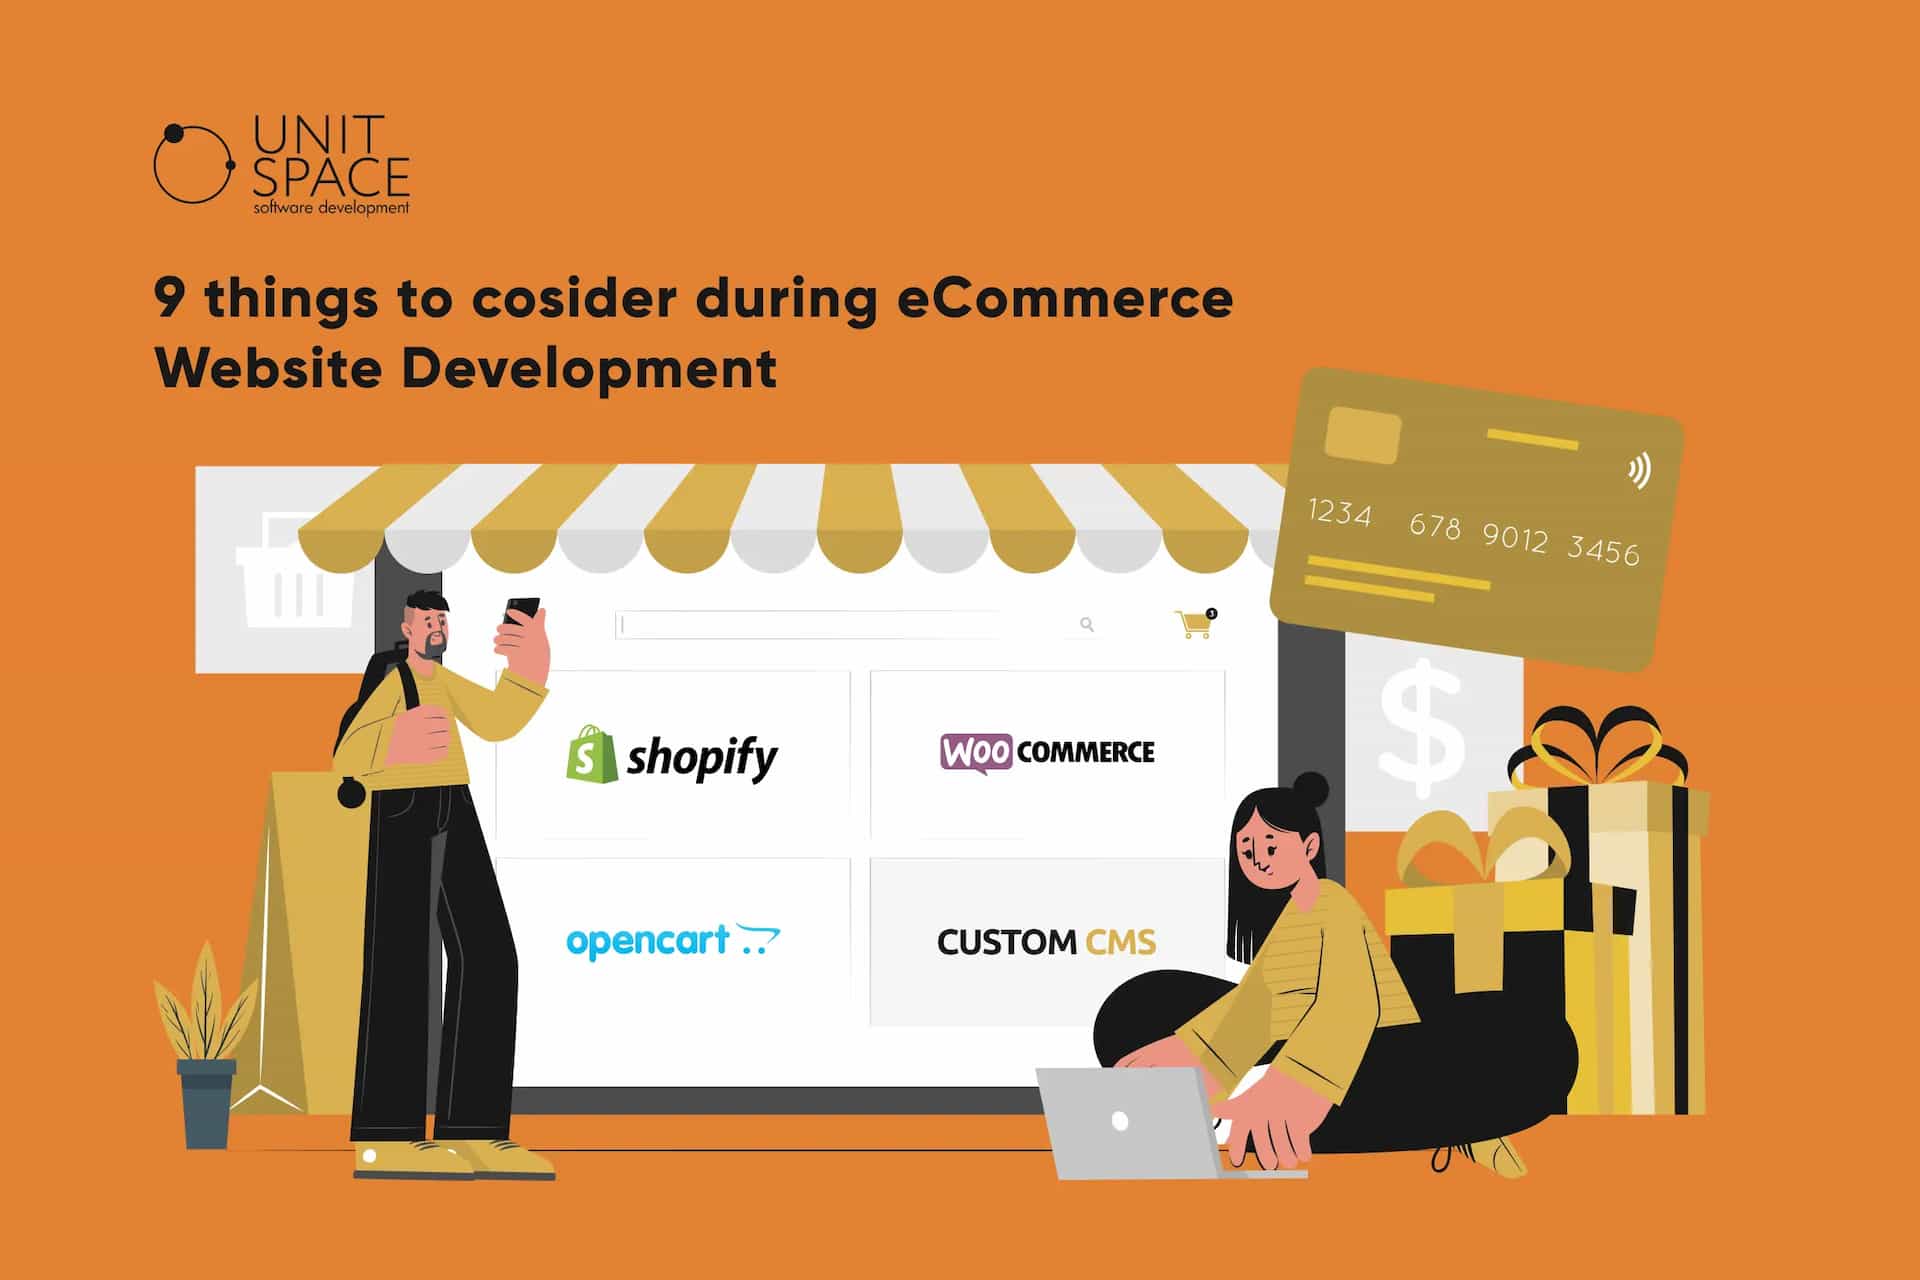 9 Things to Consider During eCommerce Website Development (Shopify, WooCommerce, Custom CMS, Open Card)